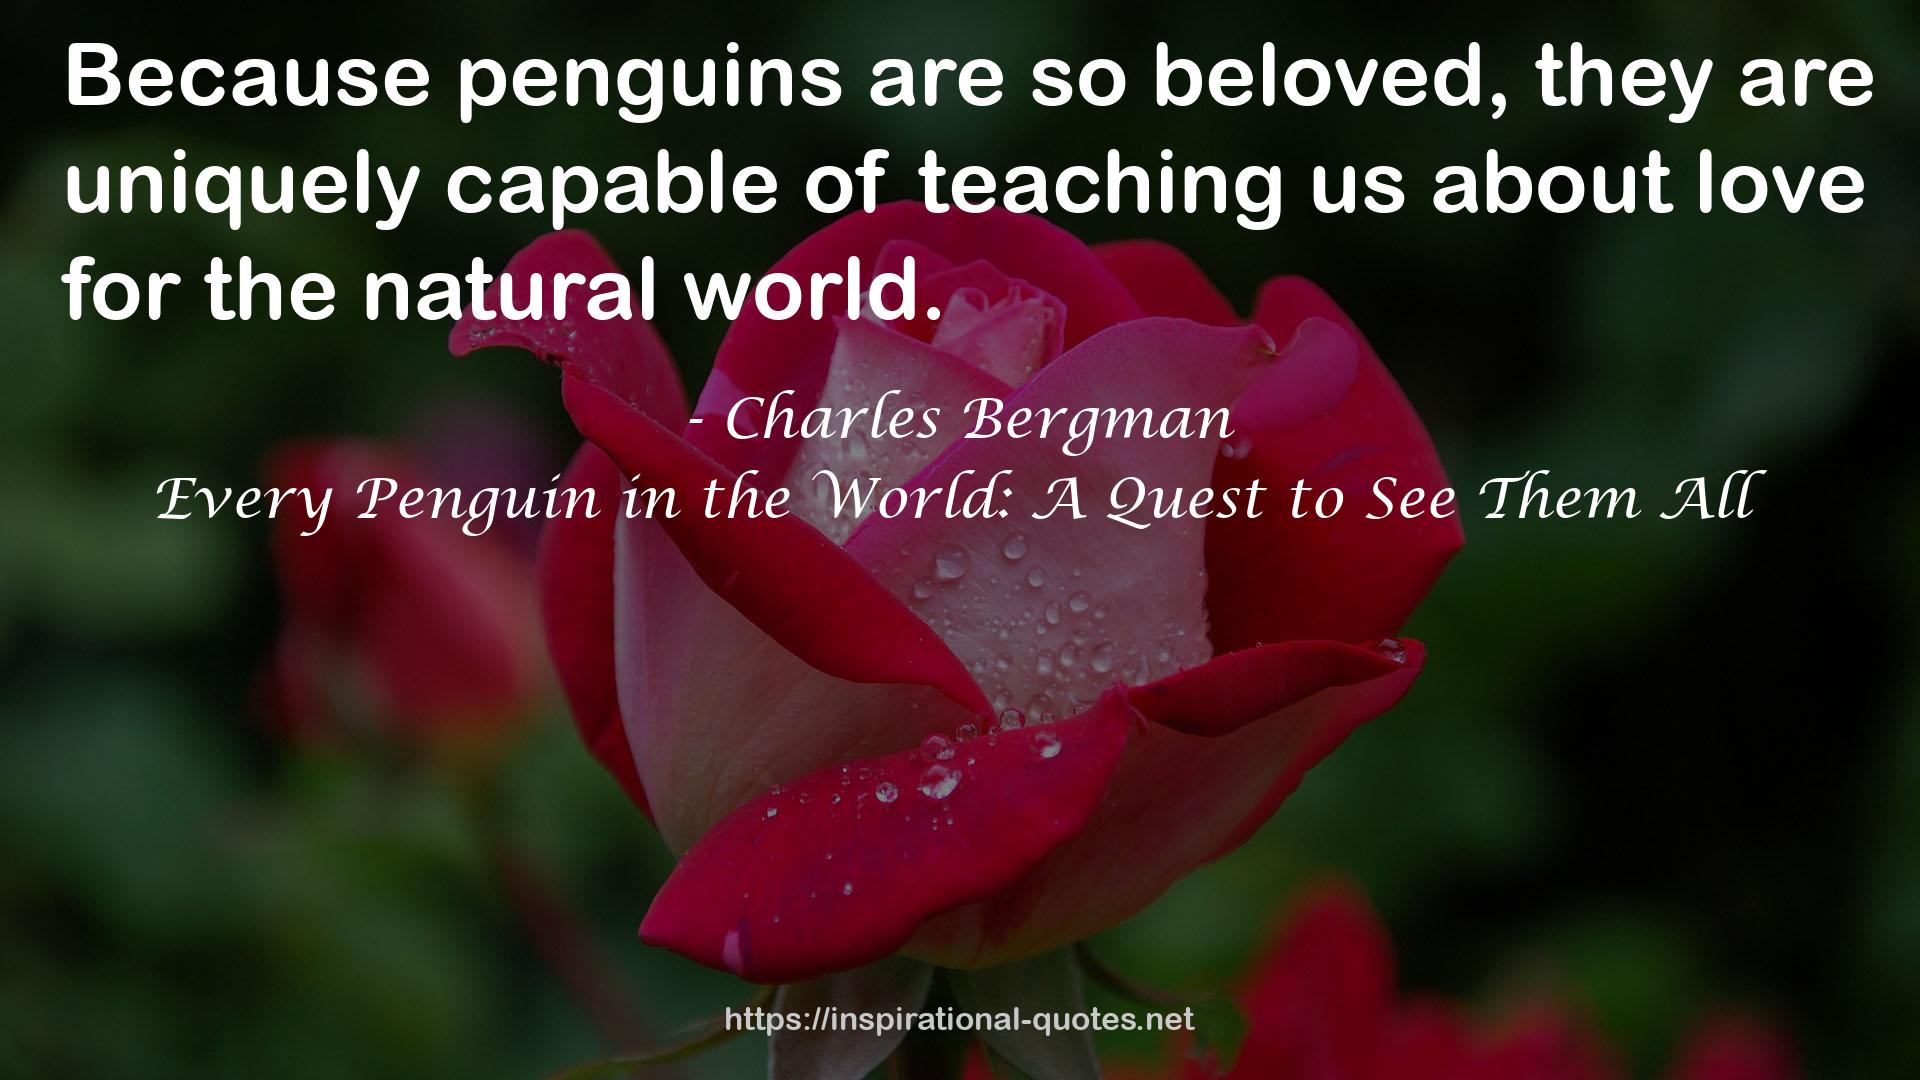 Every Penguin in the World: A Quest to See Them All QUOTES